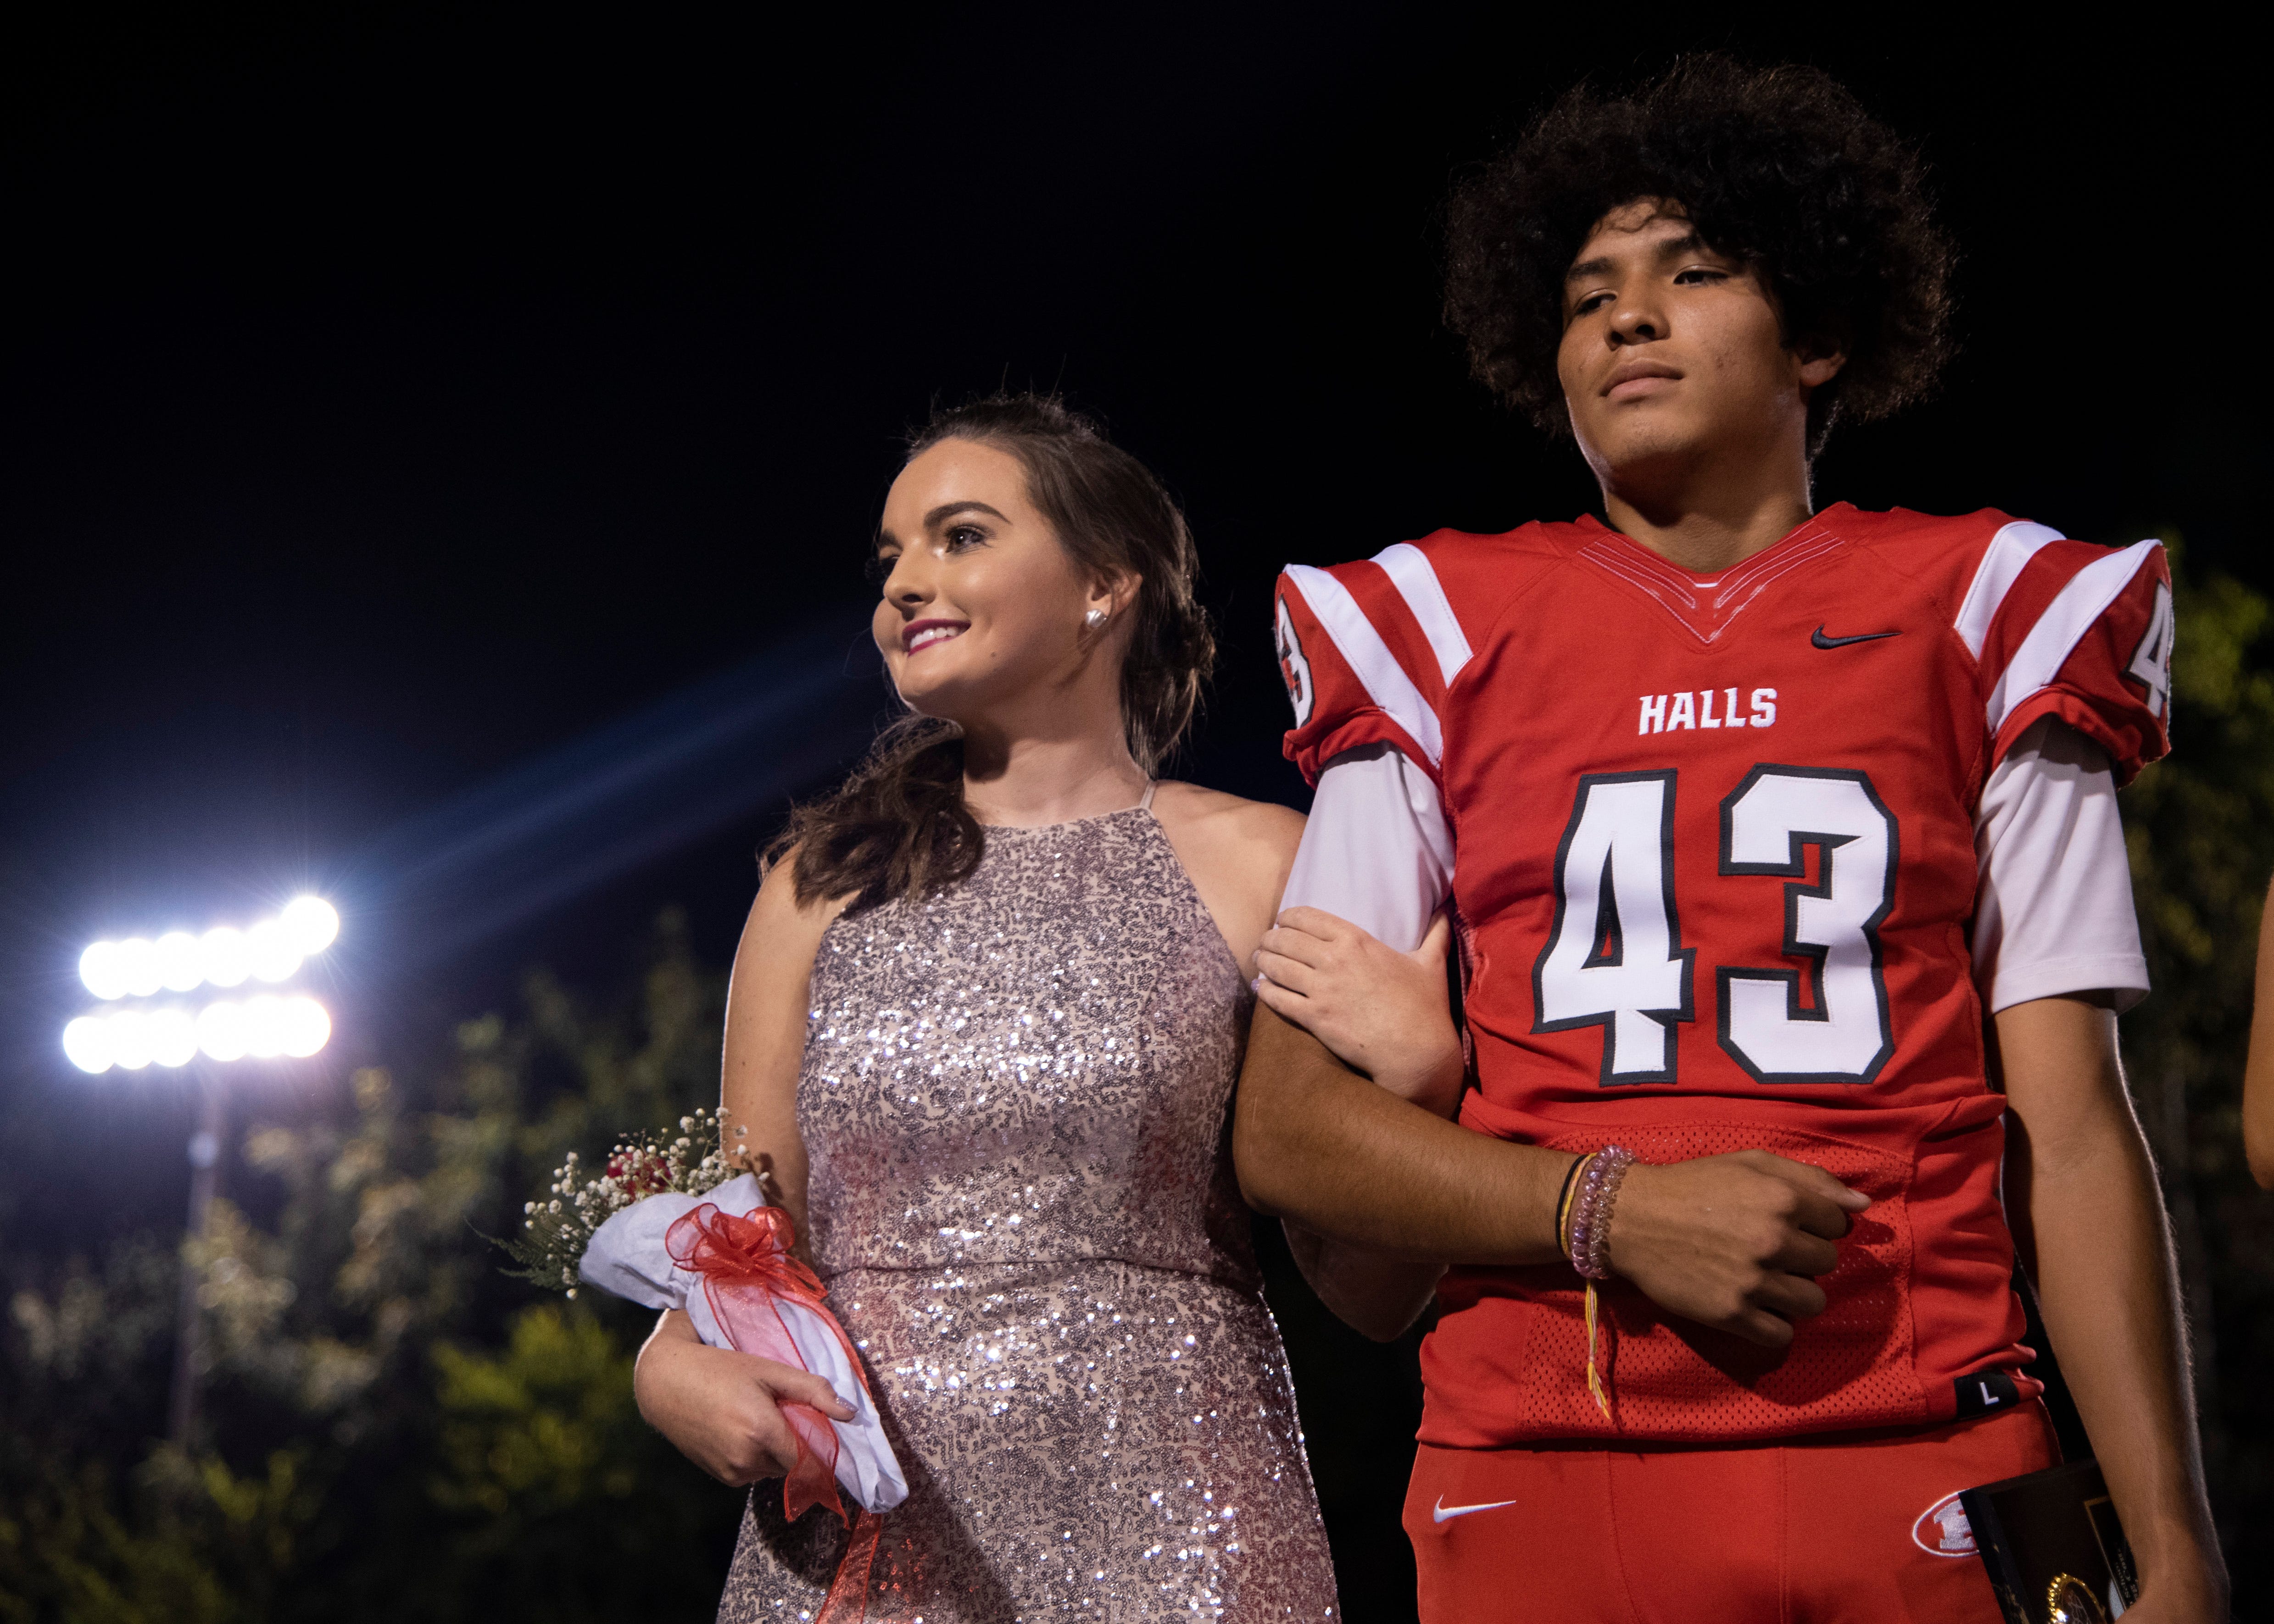 A Halls homecoming court member with Adam Ovalle (43) during the Halls and Central high school football game Friday, Oct. 4, 2019, at Halls High School.